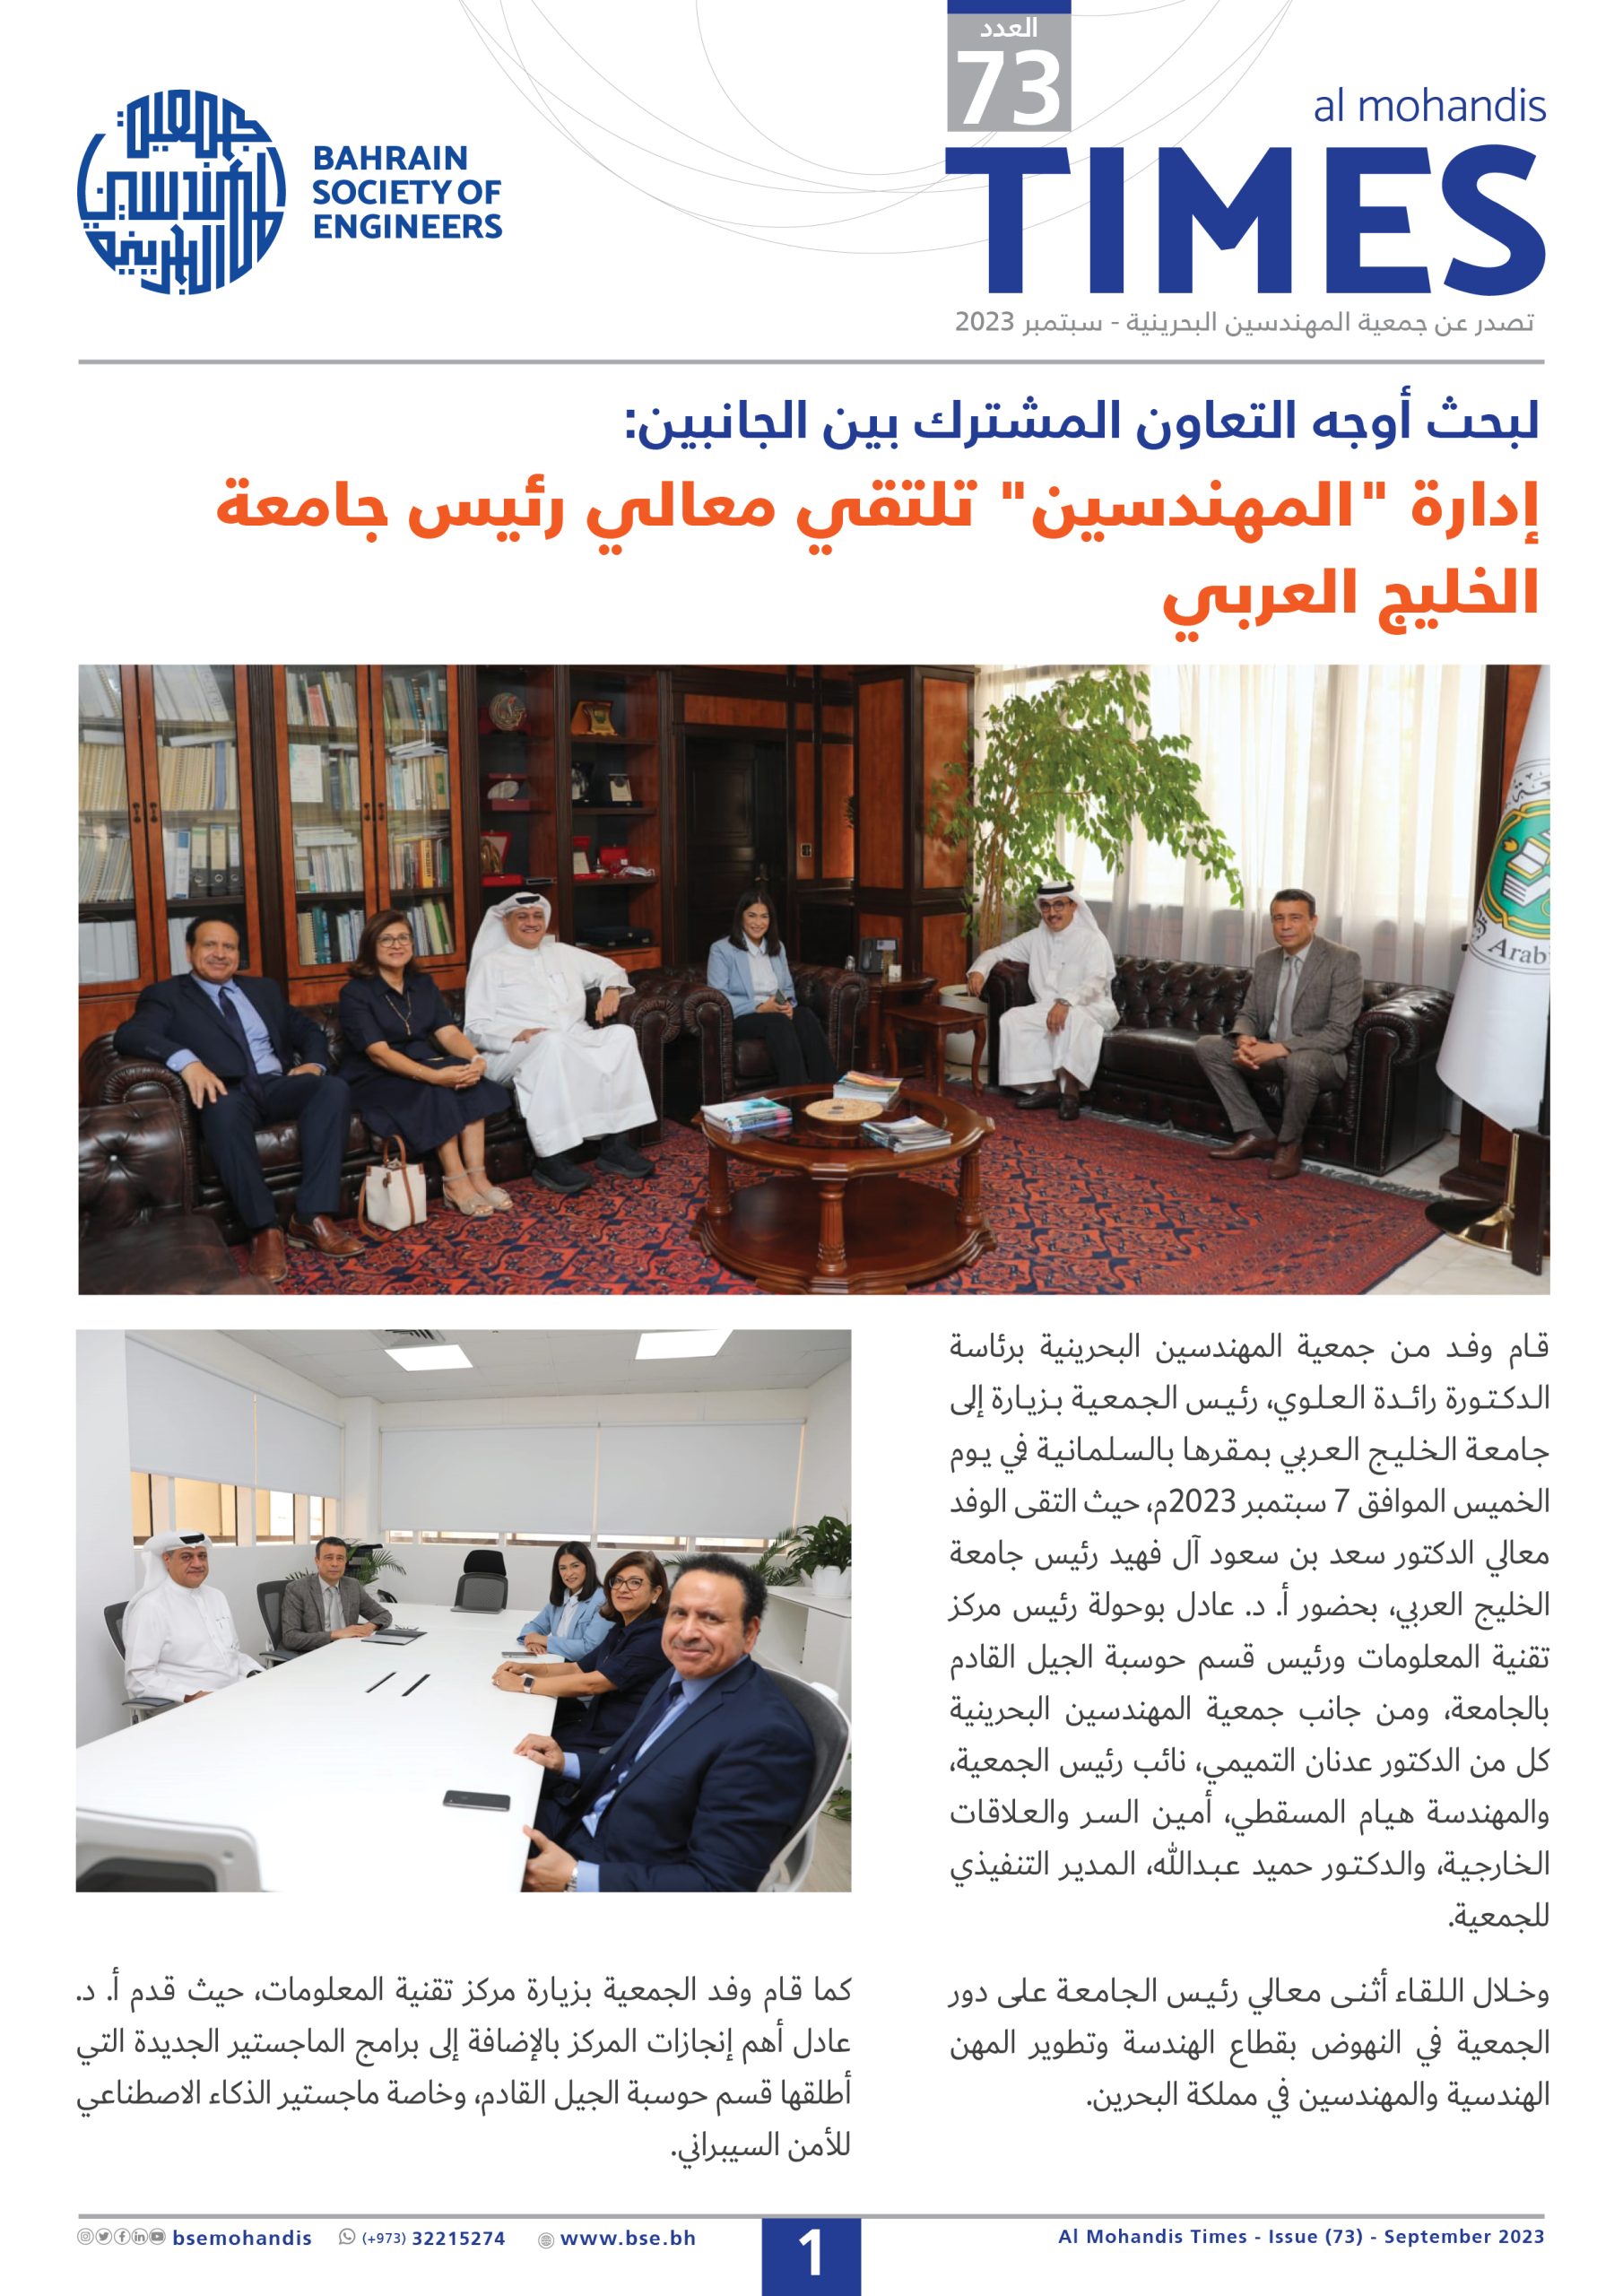 Al Mohandis Times Issue 73